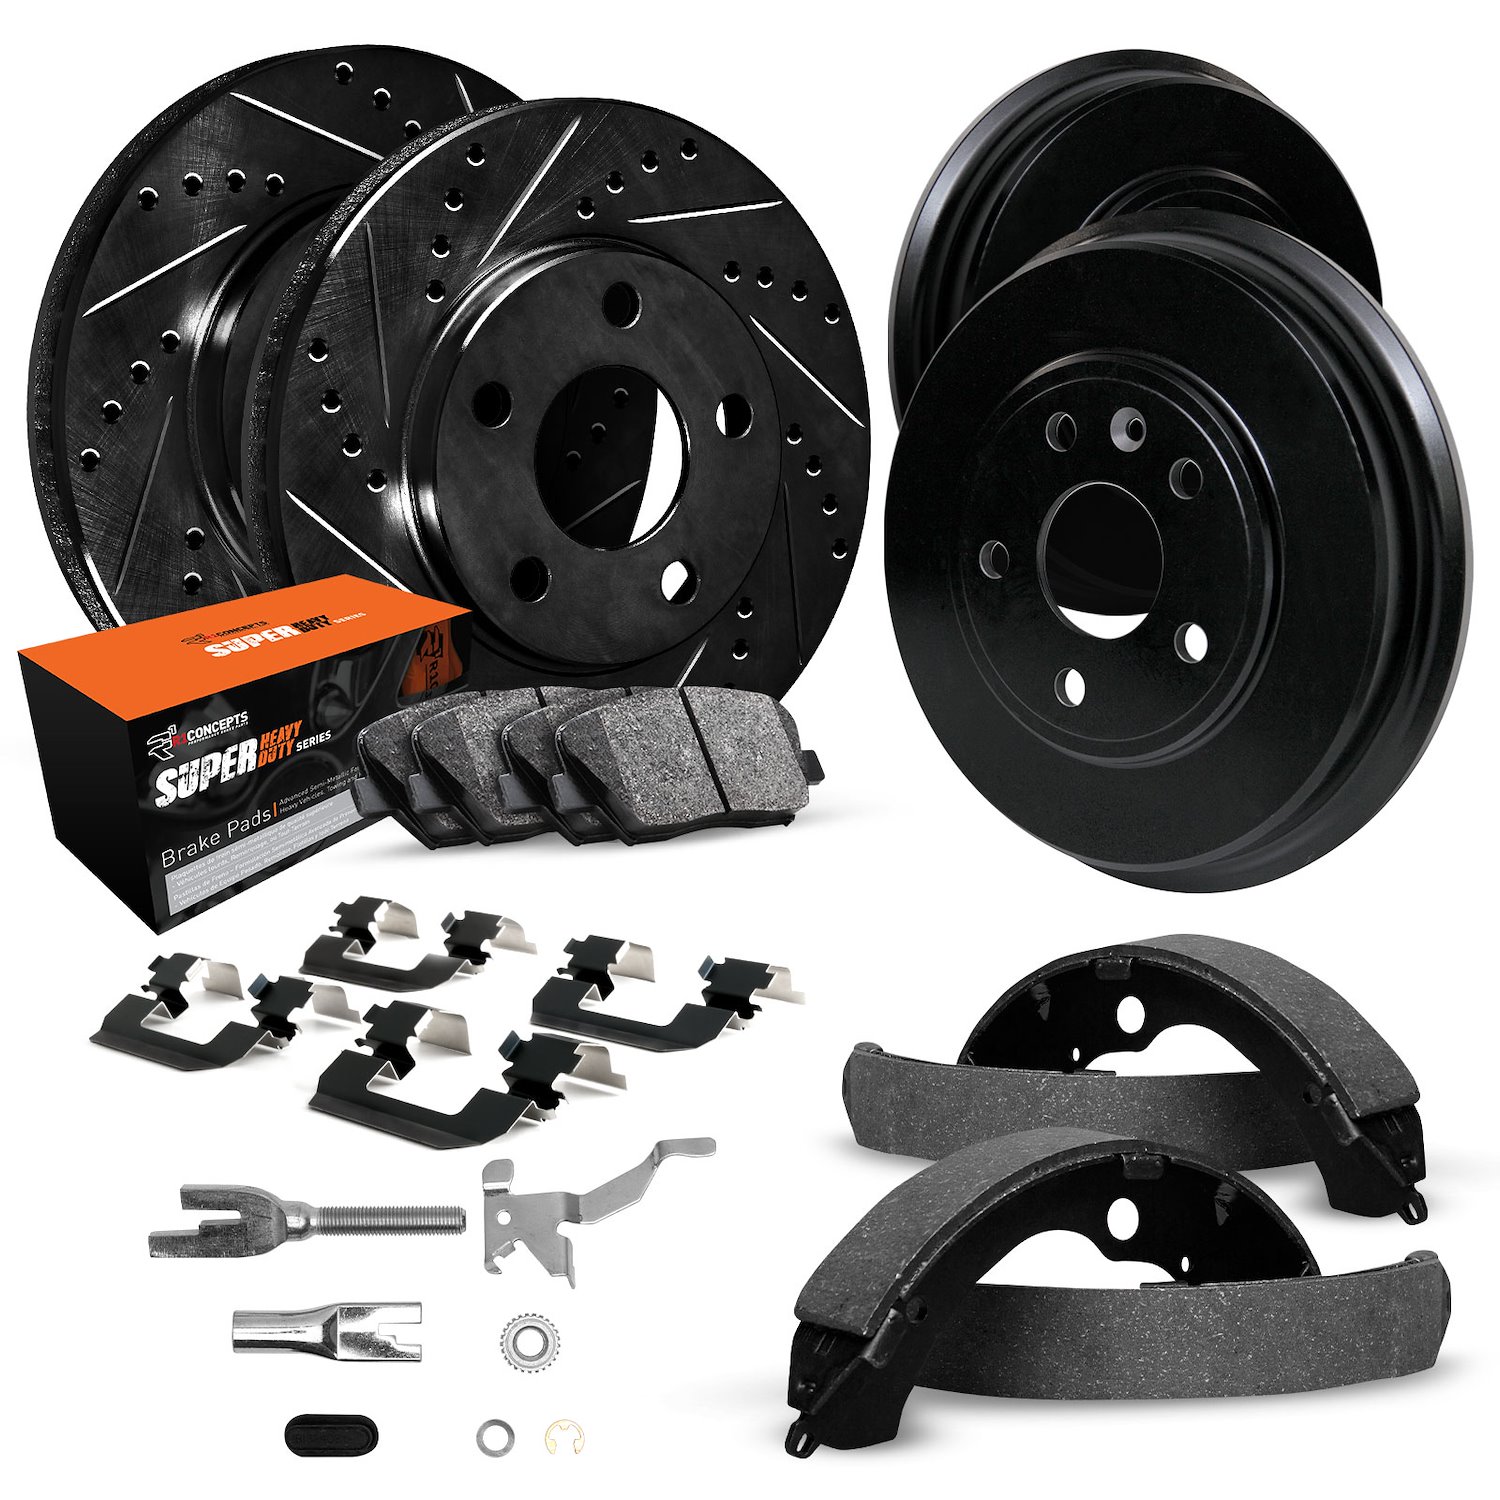 E-Line Drilled/Slotted Black Rotor & Drum Set w/Super-Duty Pads, Shoes, Hardware/Adjusters, 1994-2002 GM